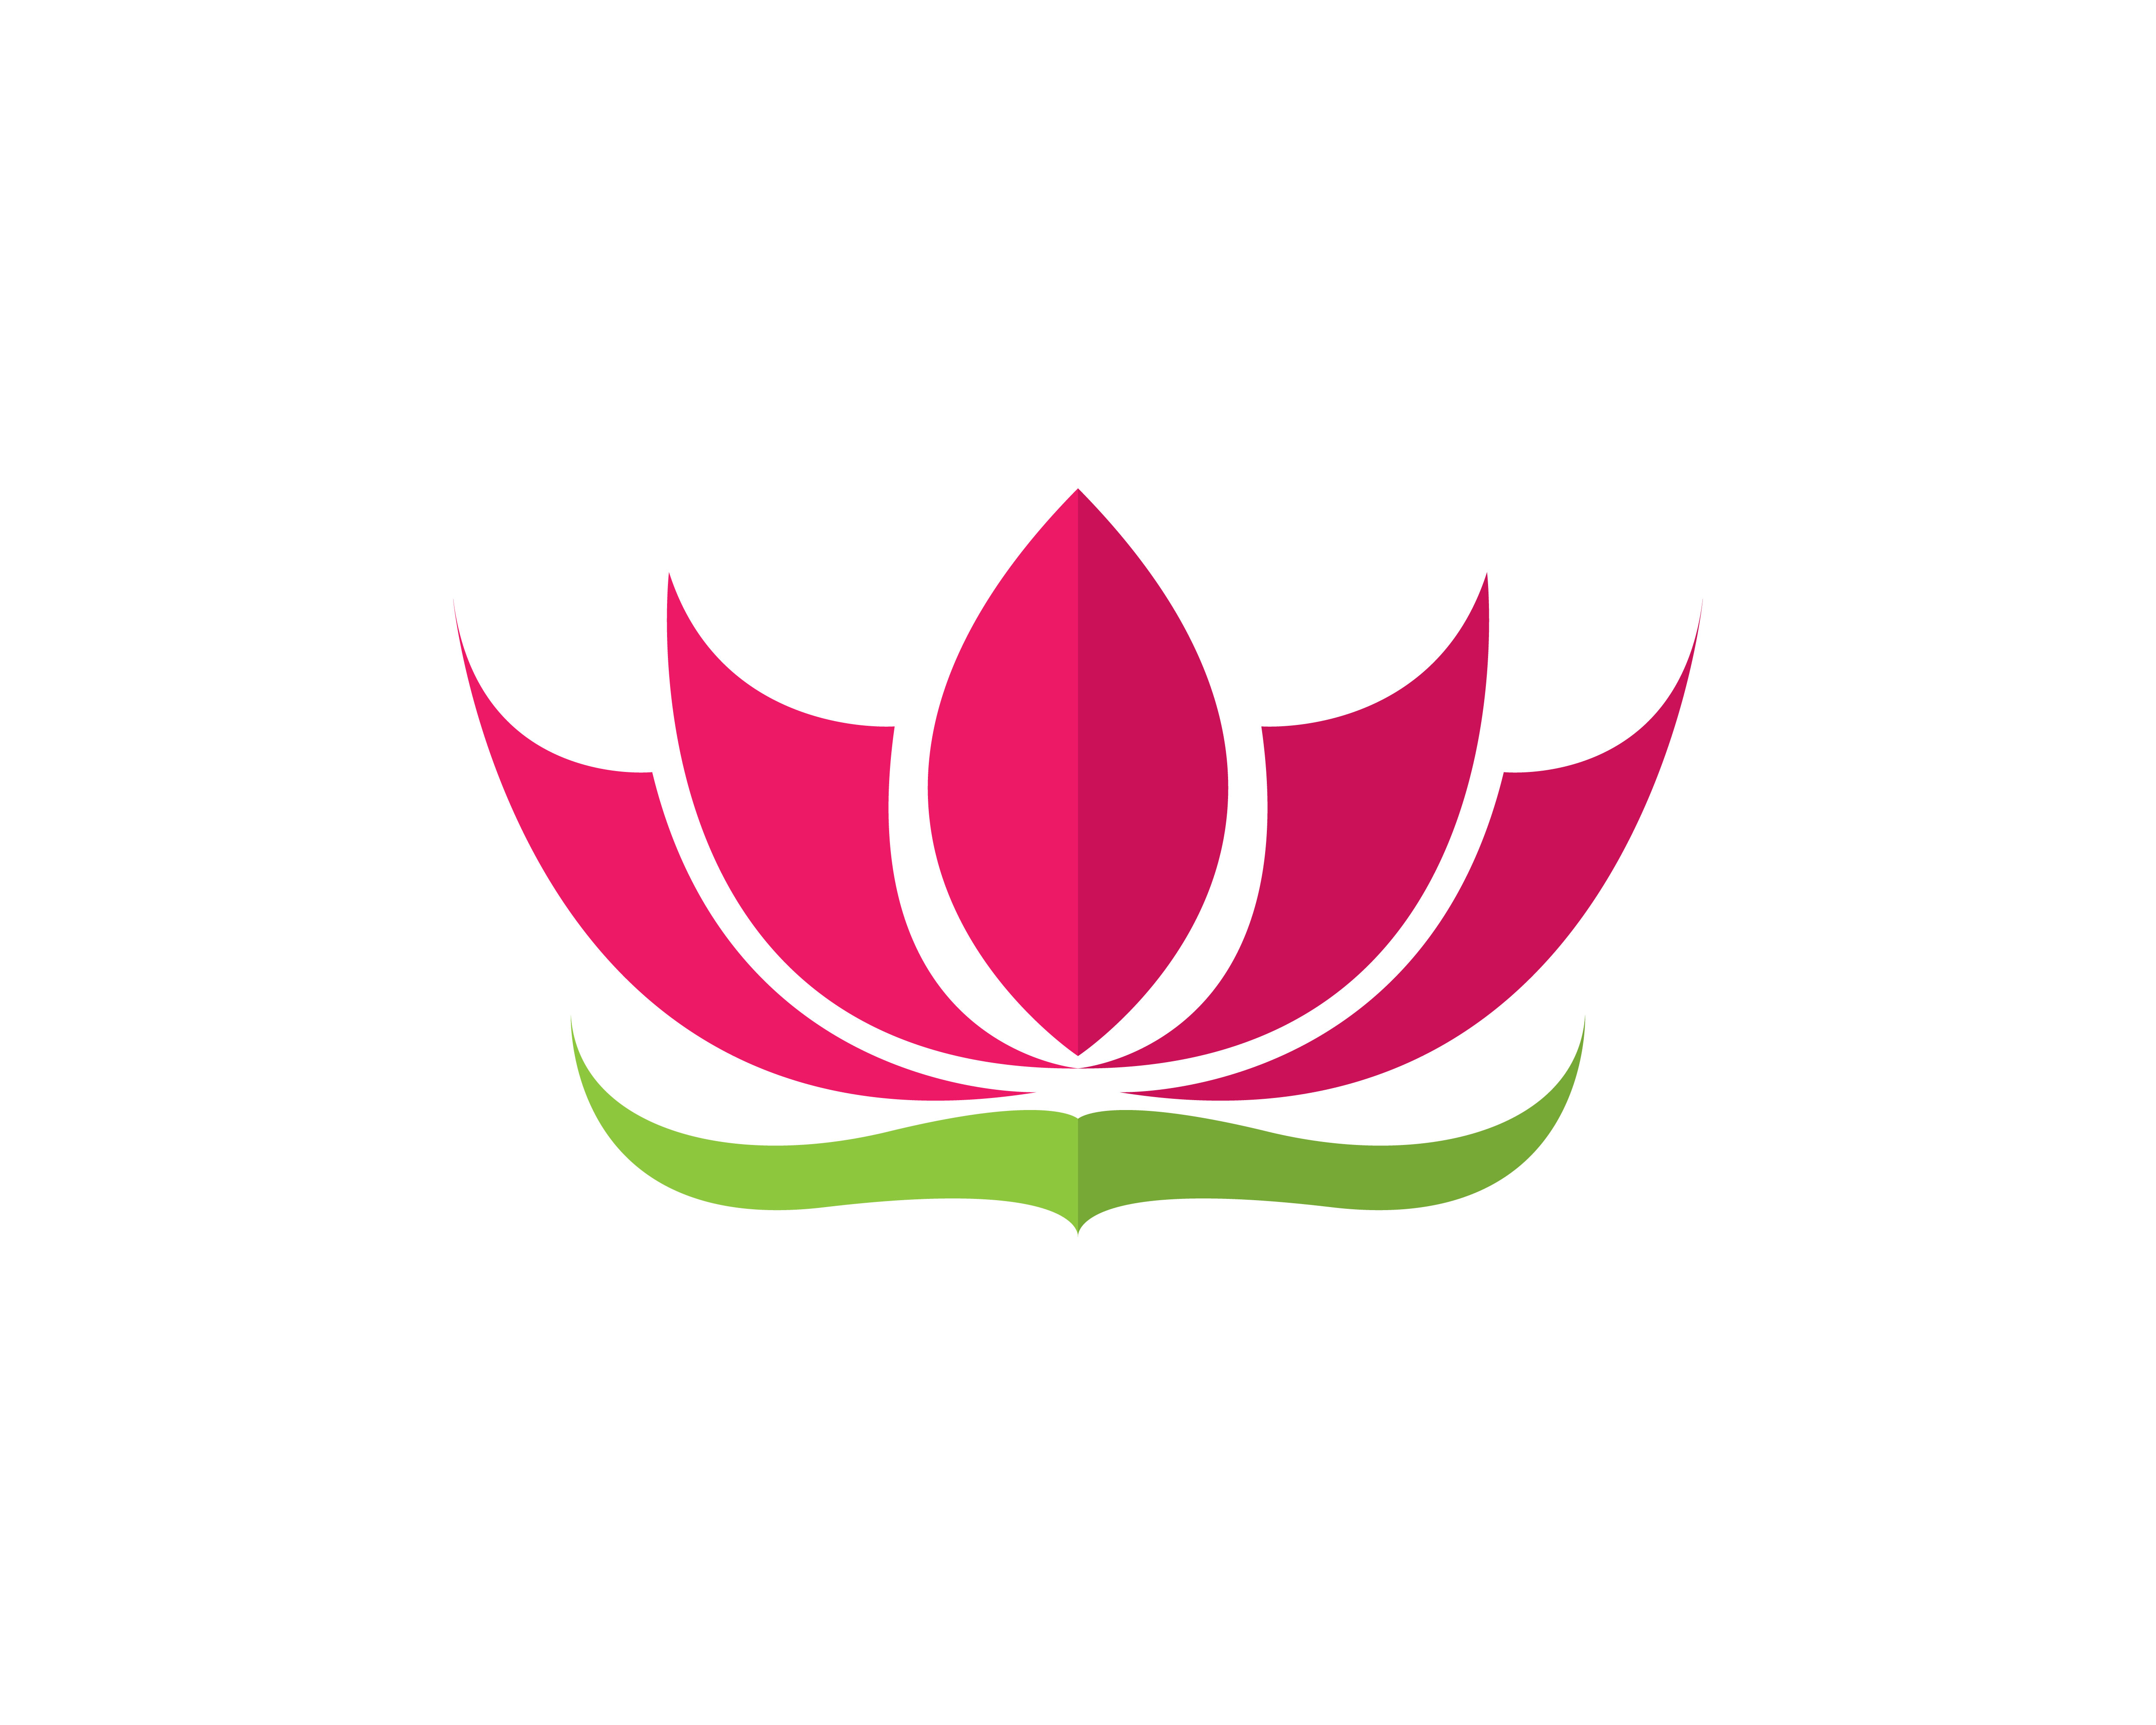  Lotus  flower  logo and symbols  vector template Download 